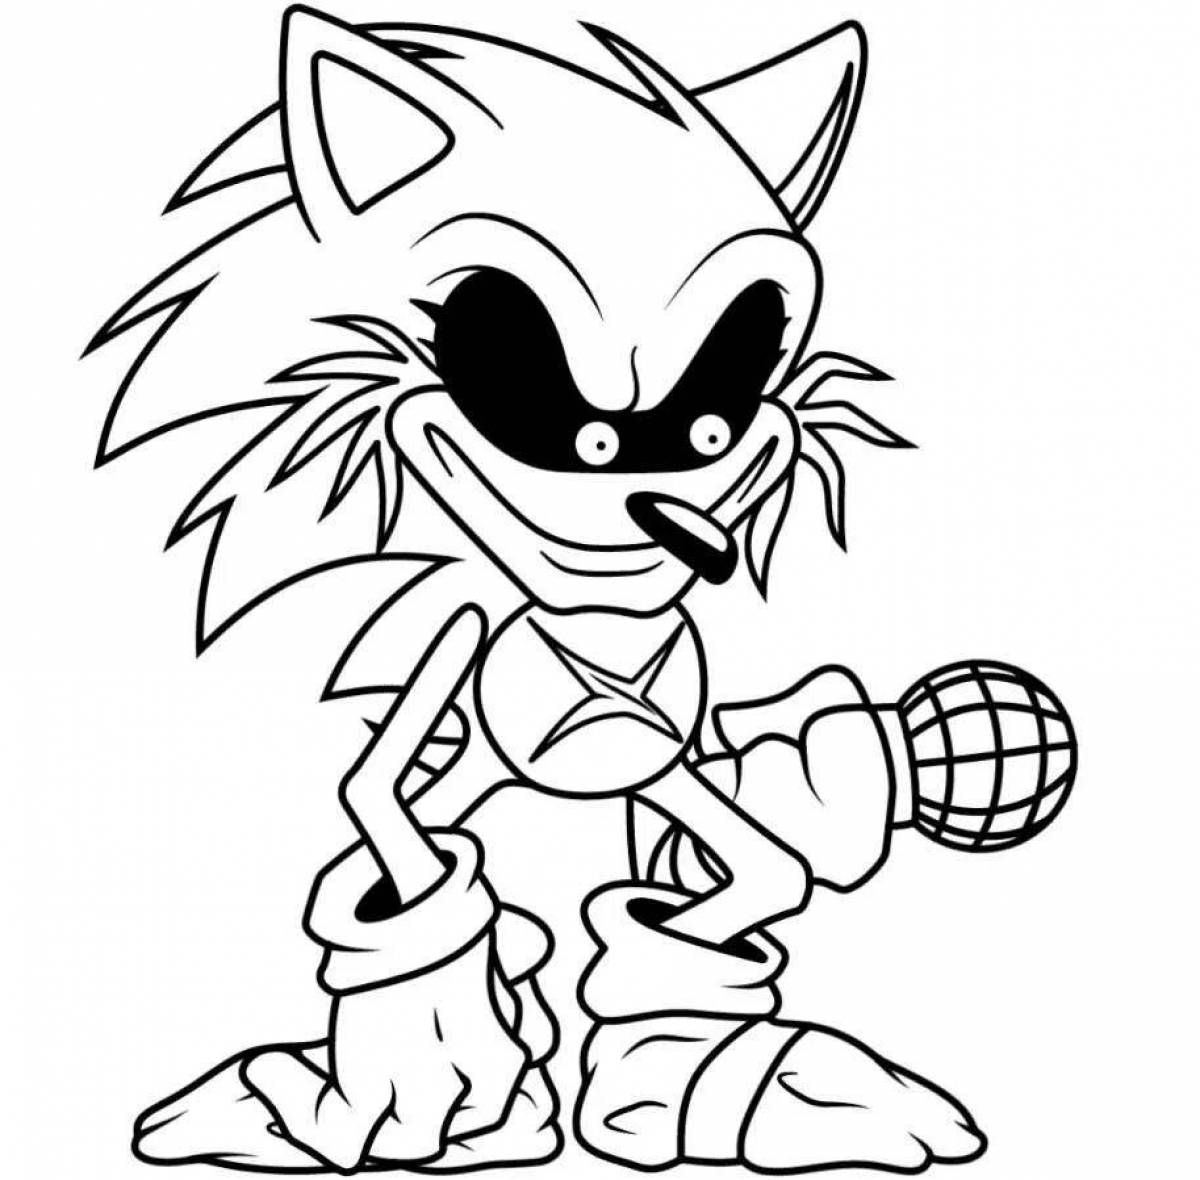 Charming sonic exe coloring book